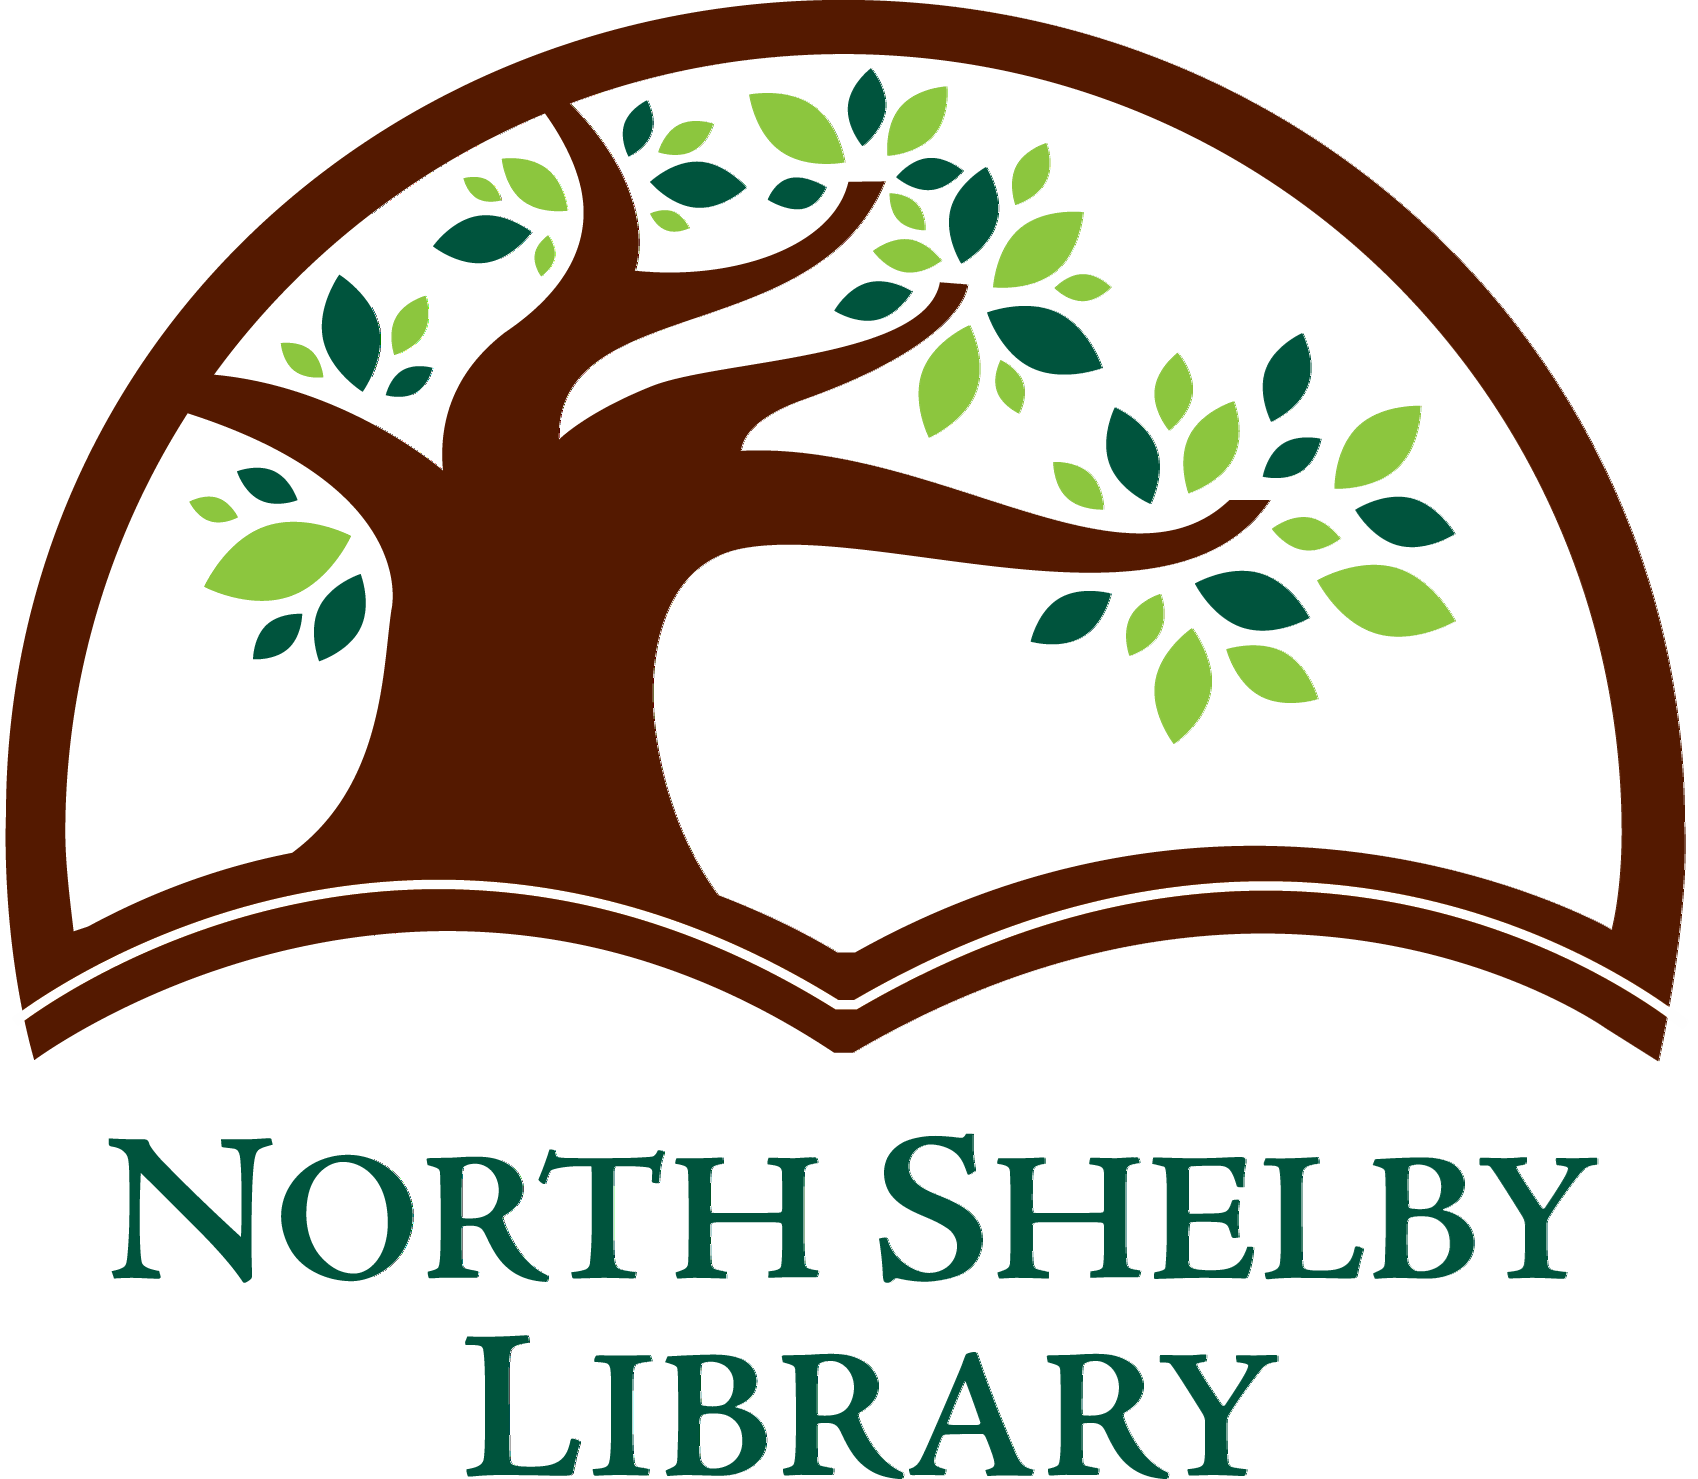 North Shelby Library Central Library